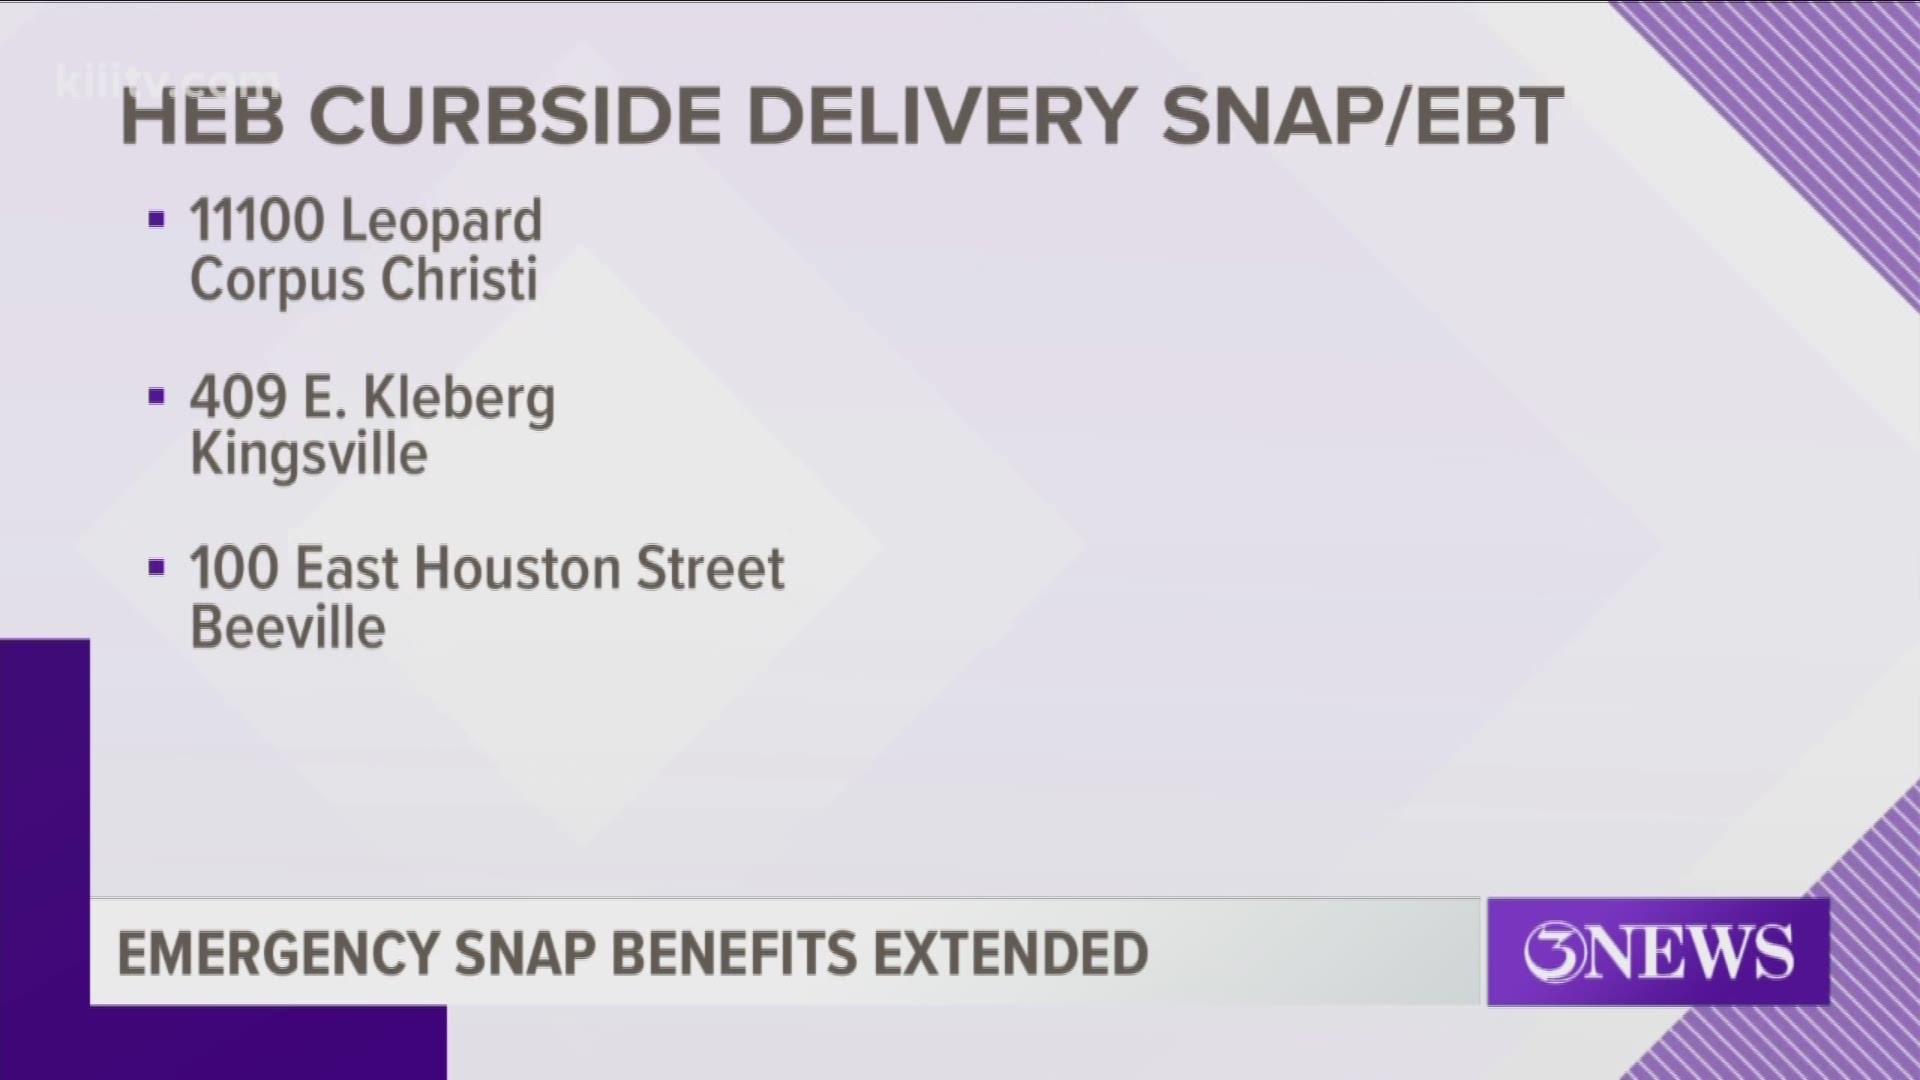 Curbside delivery at some of the neighborhood H-E-B stores has just become a little bit easier.